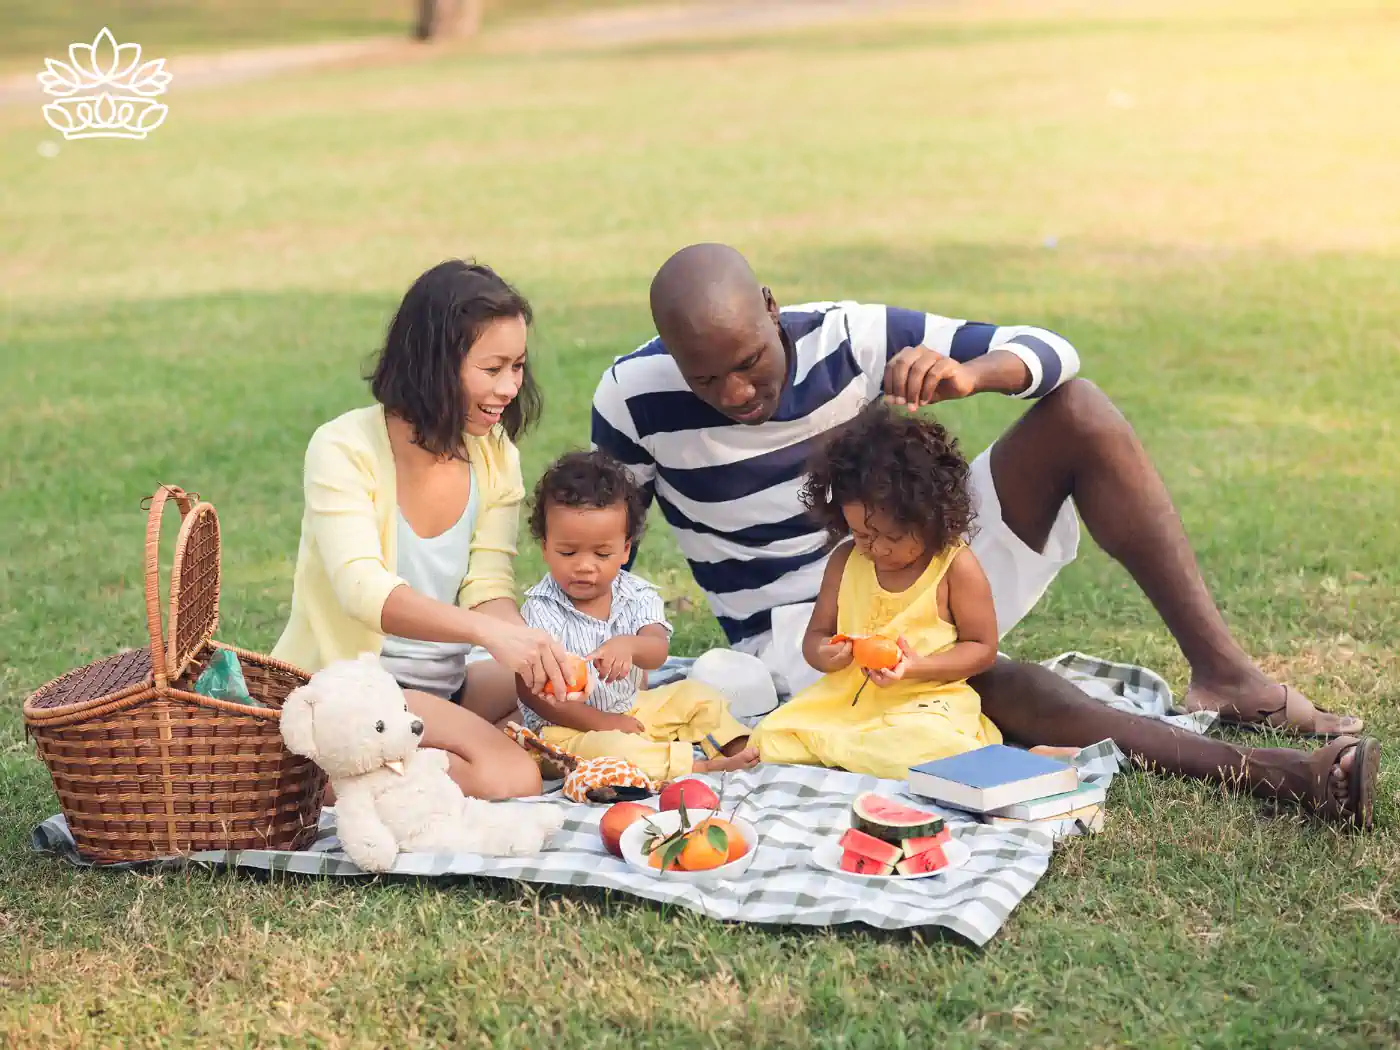 A family with young children enjoying a sunny picnic, with a stuffed teddy bear and a wicker basket filled with food. Fabulous Flowers and Gifts - Picnic Gift Baskets Collection.